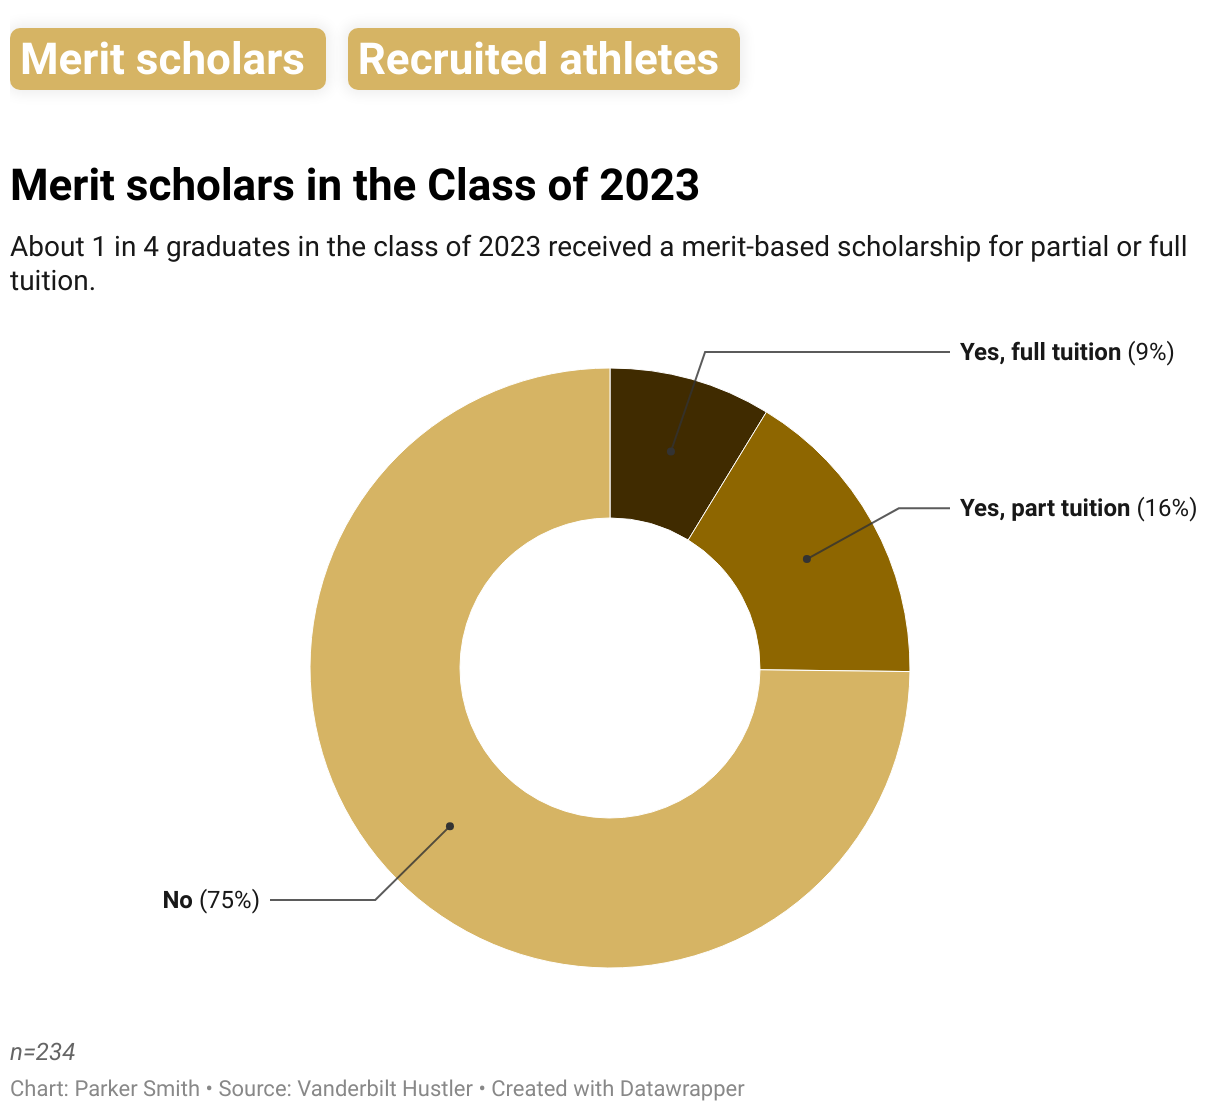 A pie chart showing the proportions of the class of 2023 that received merit scholarships. 74.8% of respondents received none; 16.5% received merit scholarships for part of their tuition; and 8.7% received merit scholarships for full tuition.